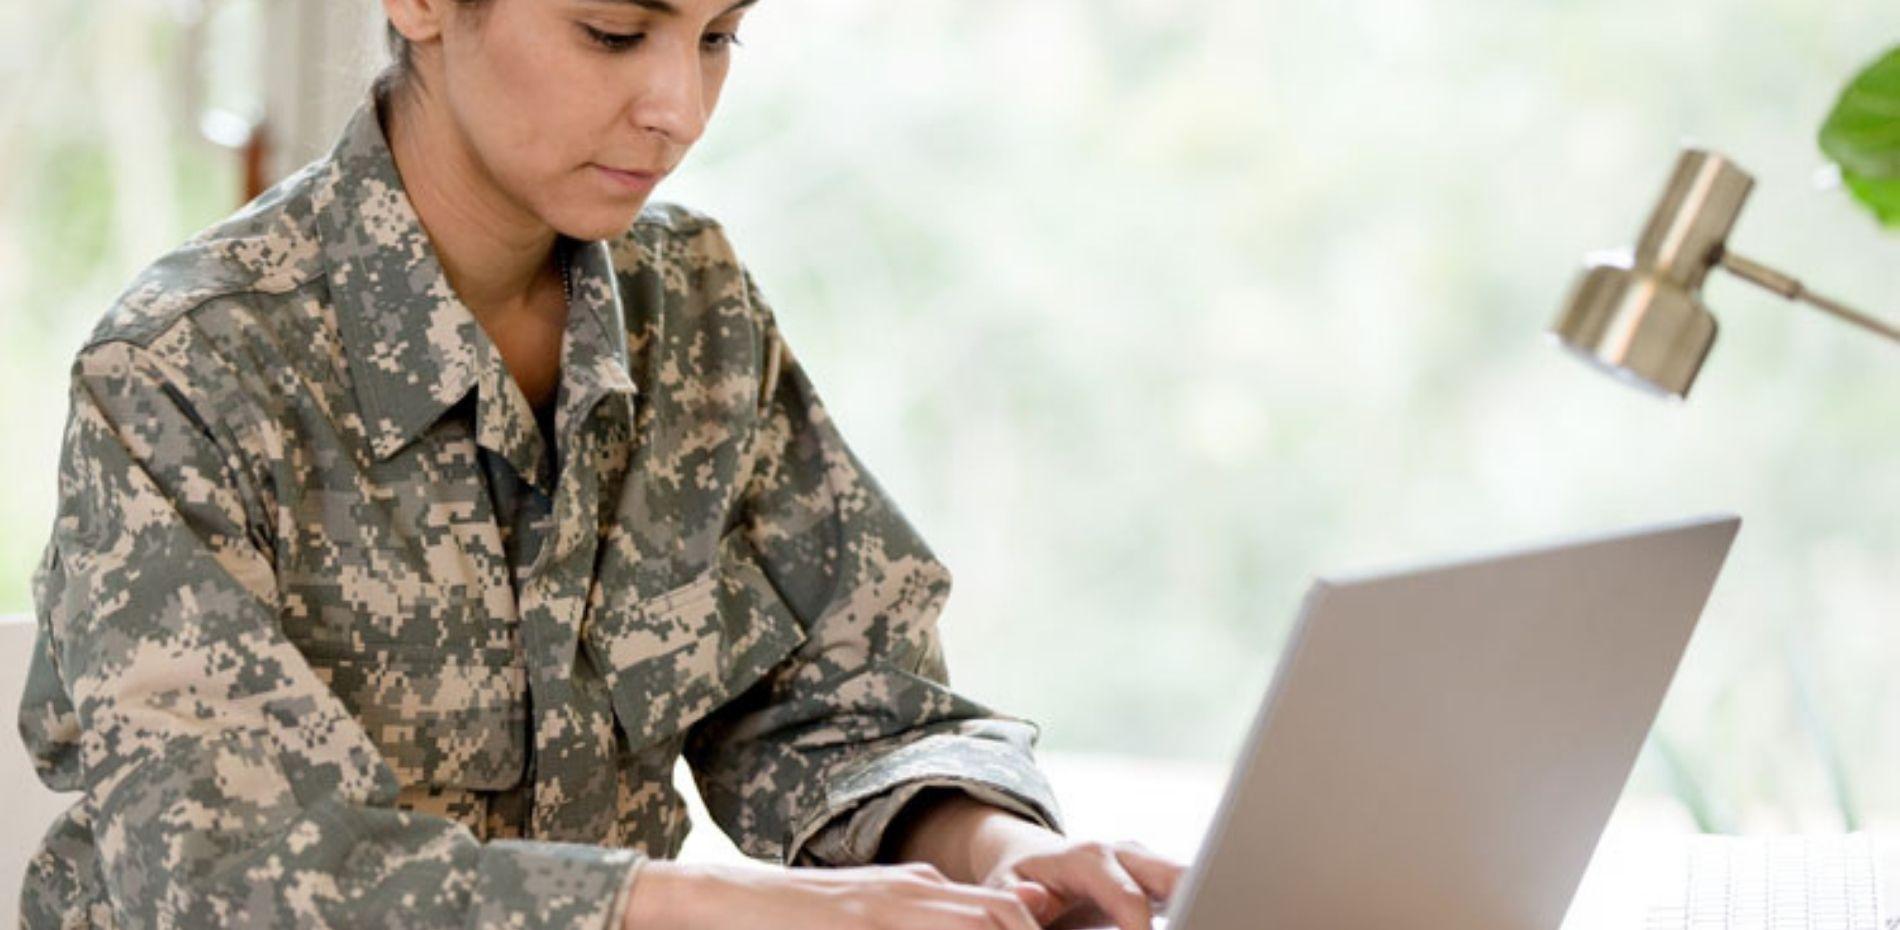 Woman in military uniform working on laptop